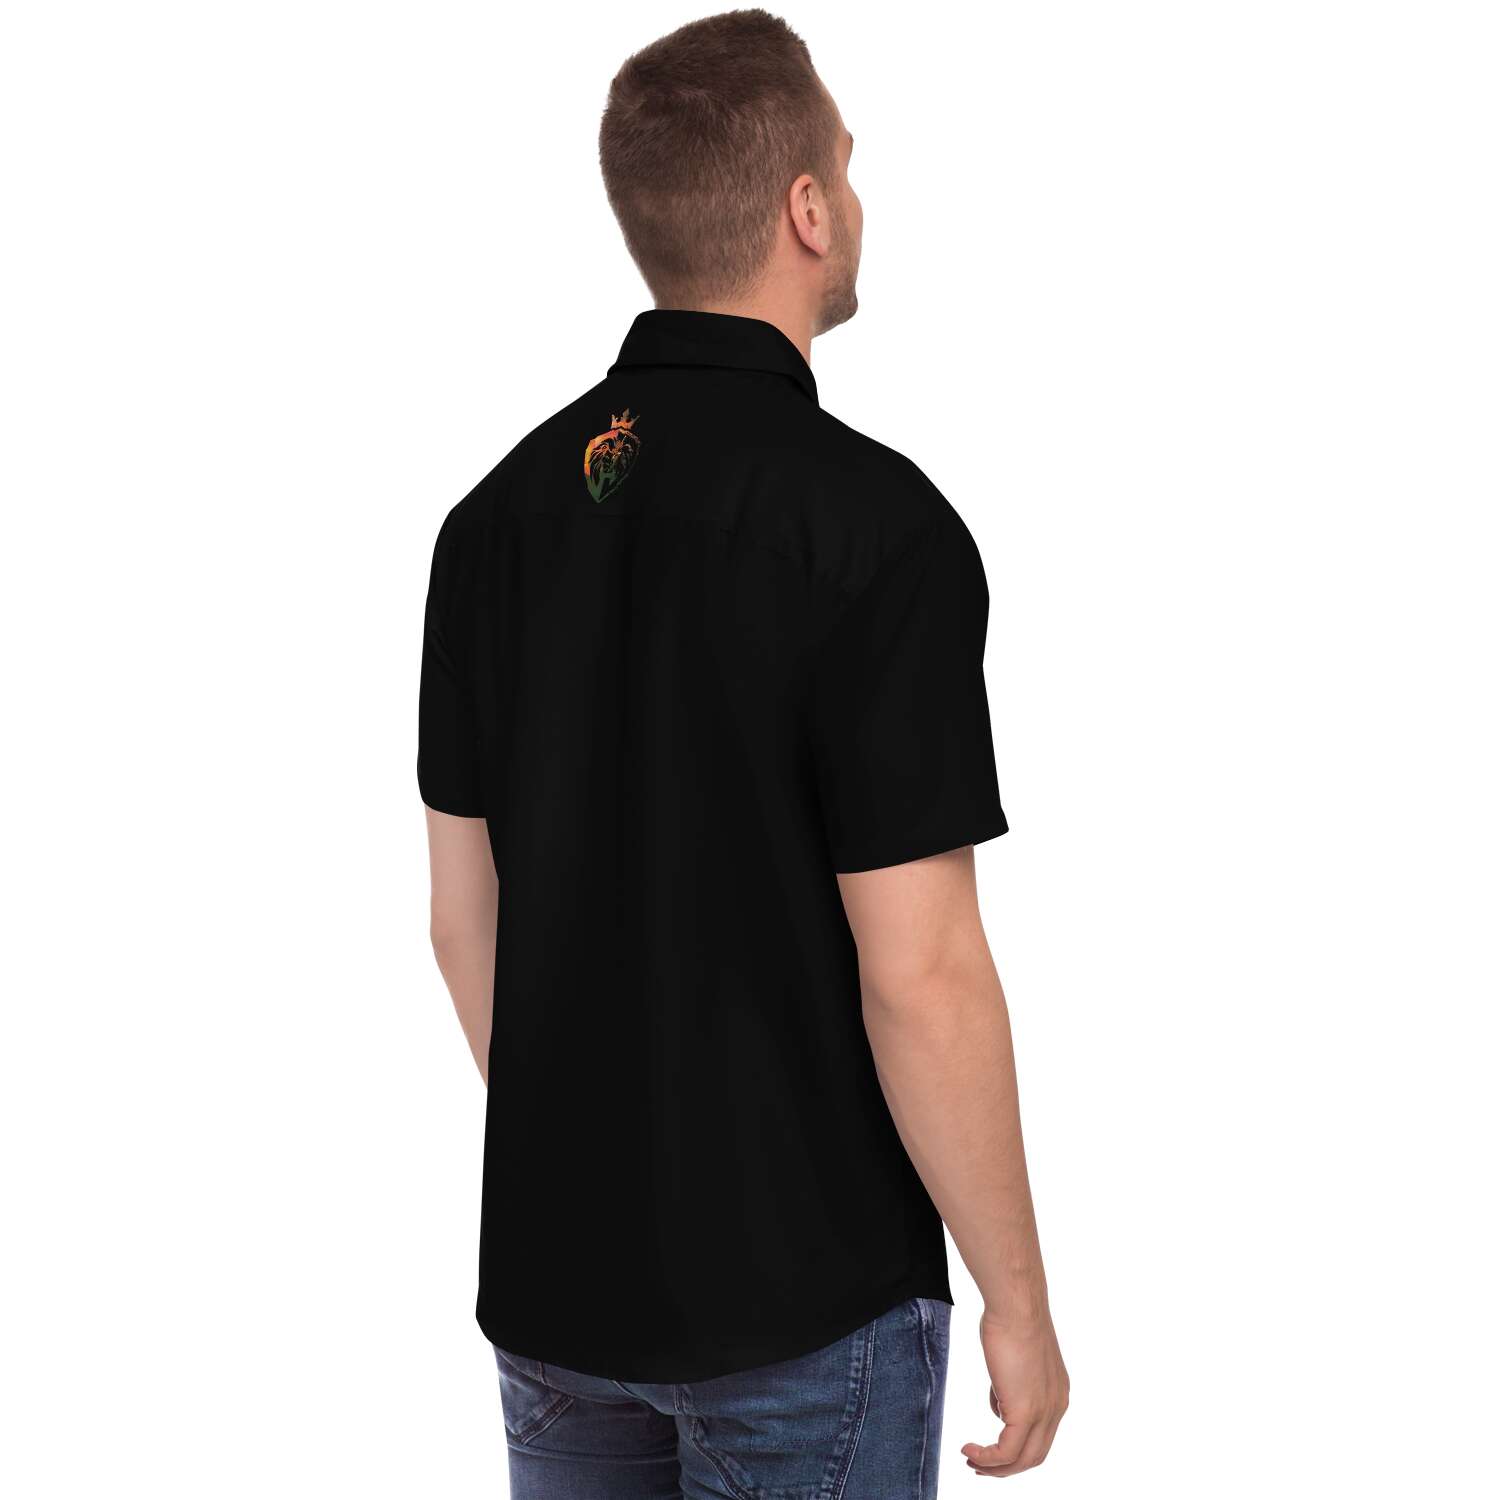 Kingbreed Collection Button Down Black